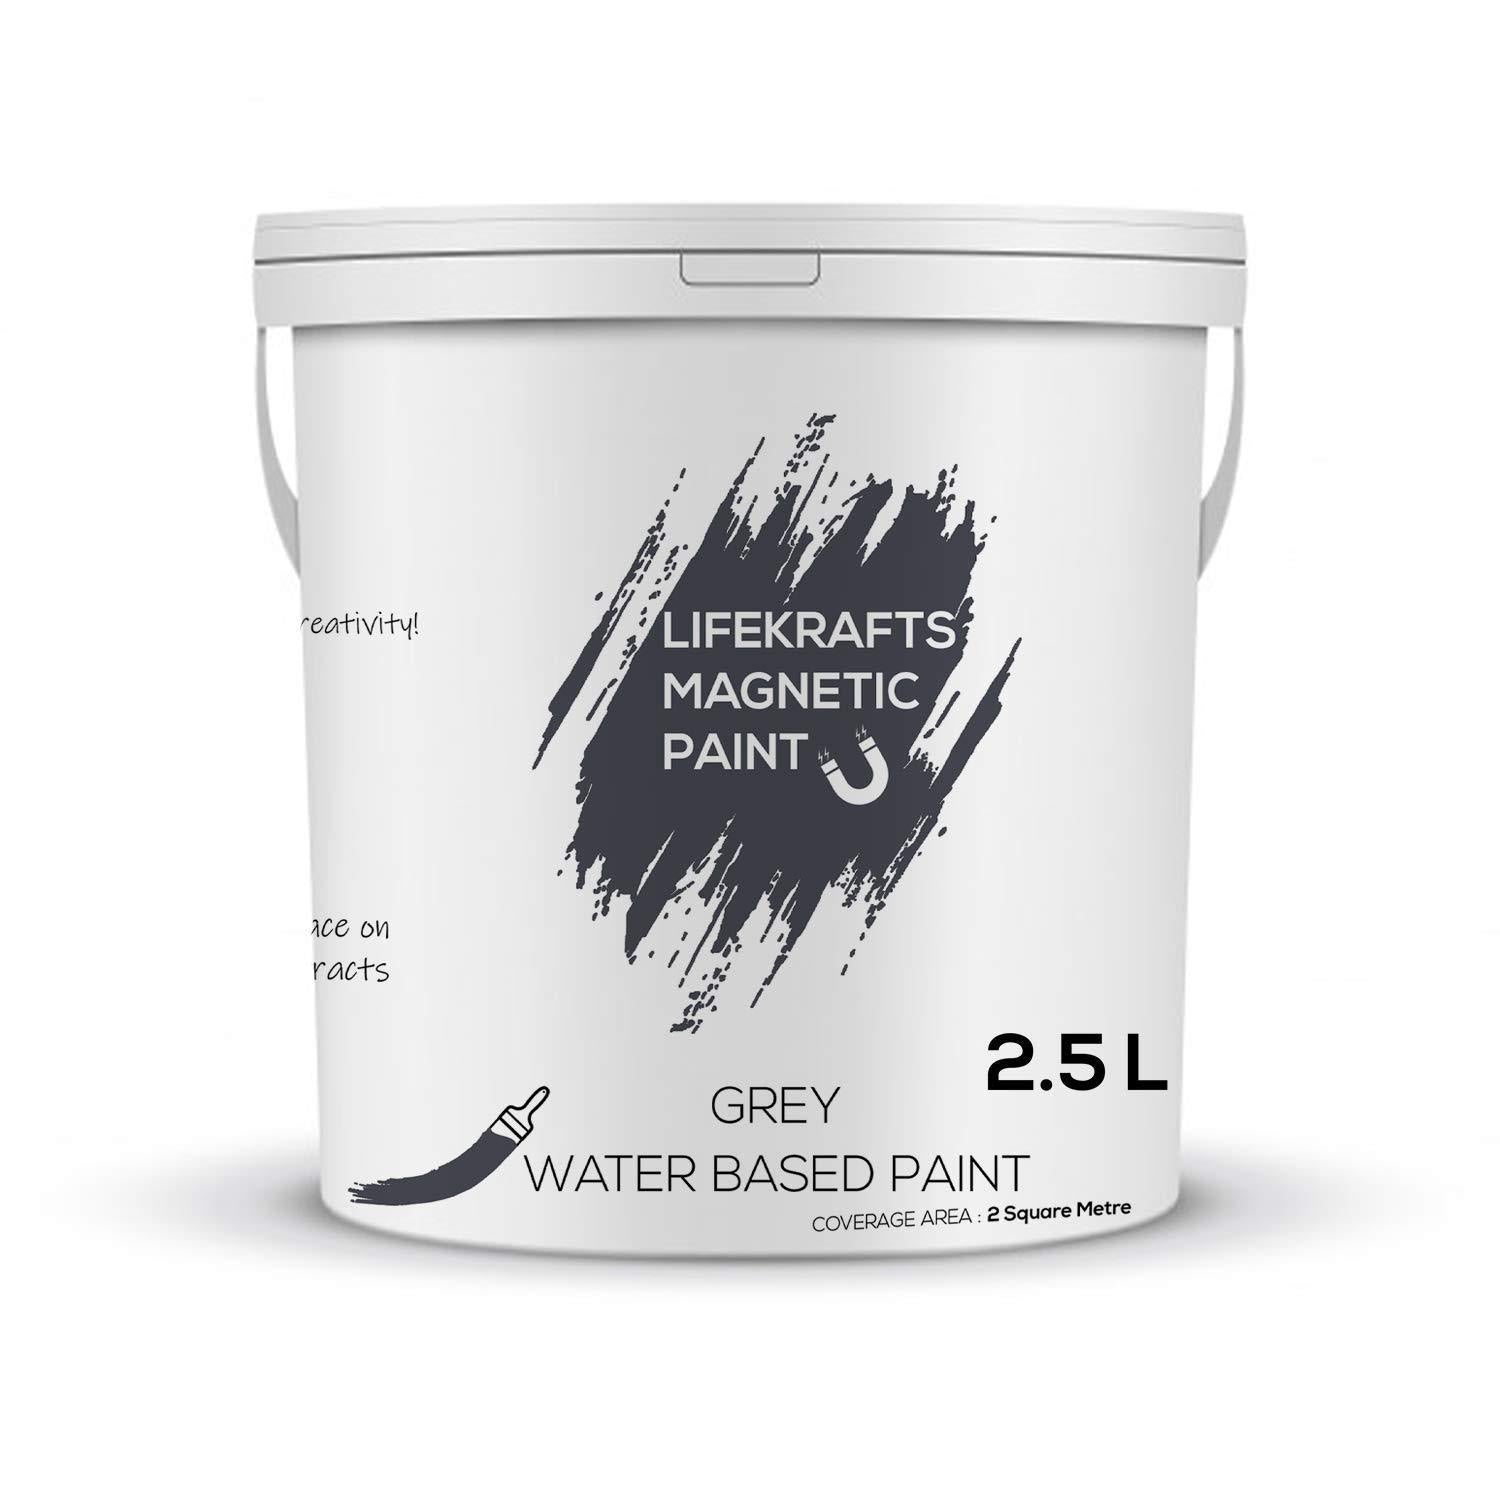 Magnetic Receptive Wall Paint/ Grey Water based Paint LifeKrafts